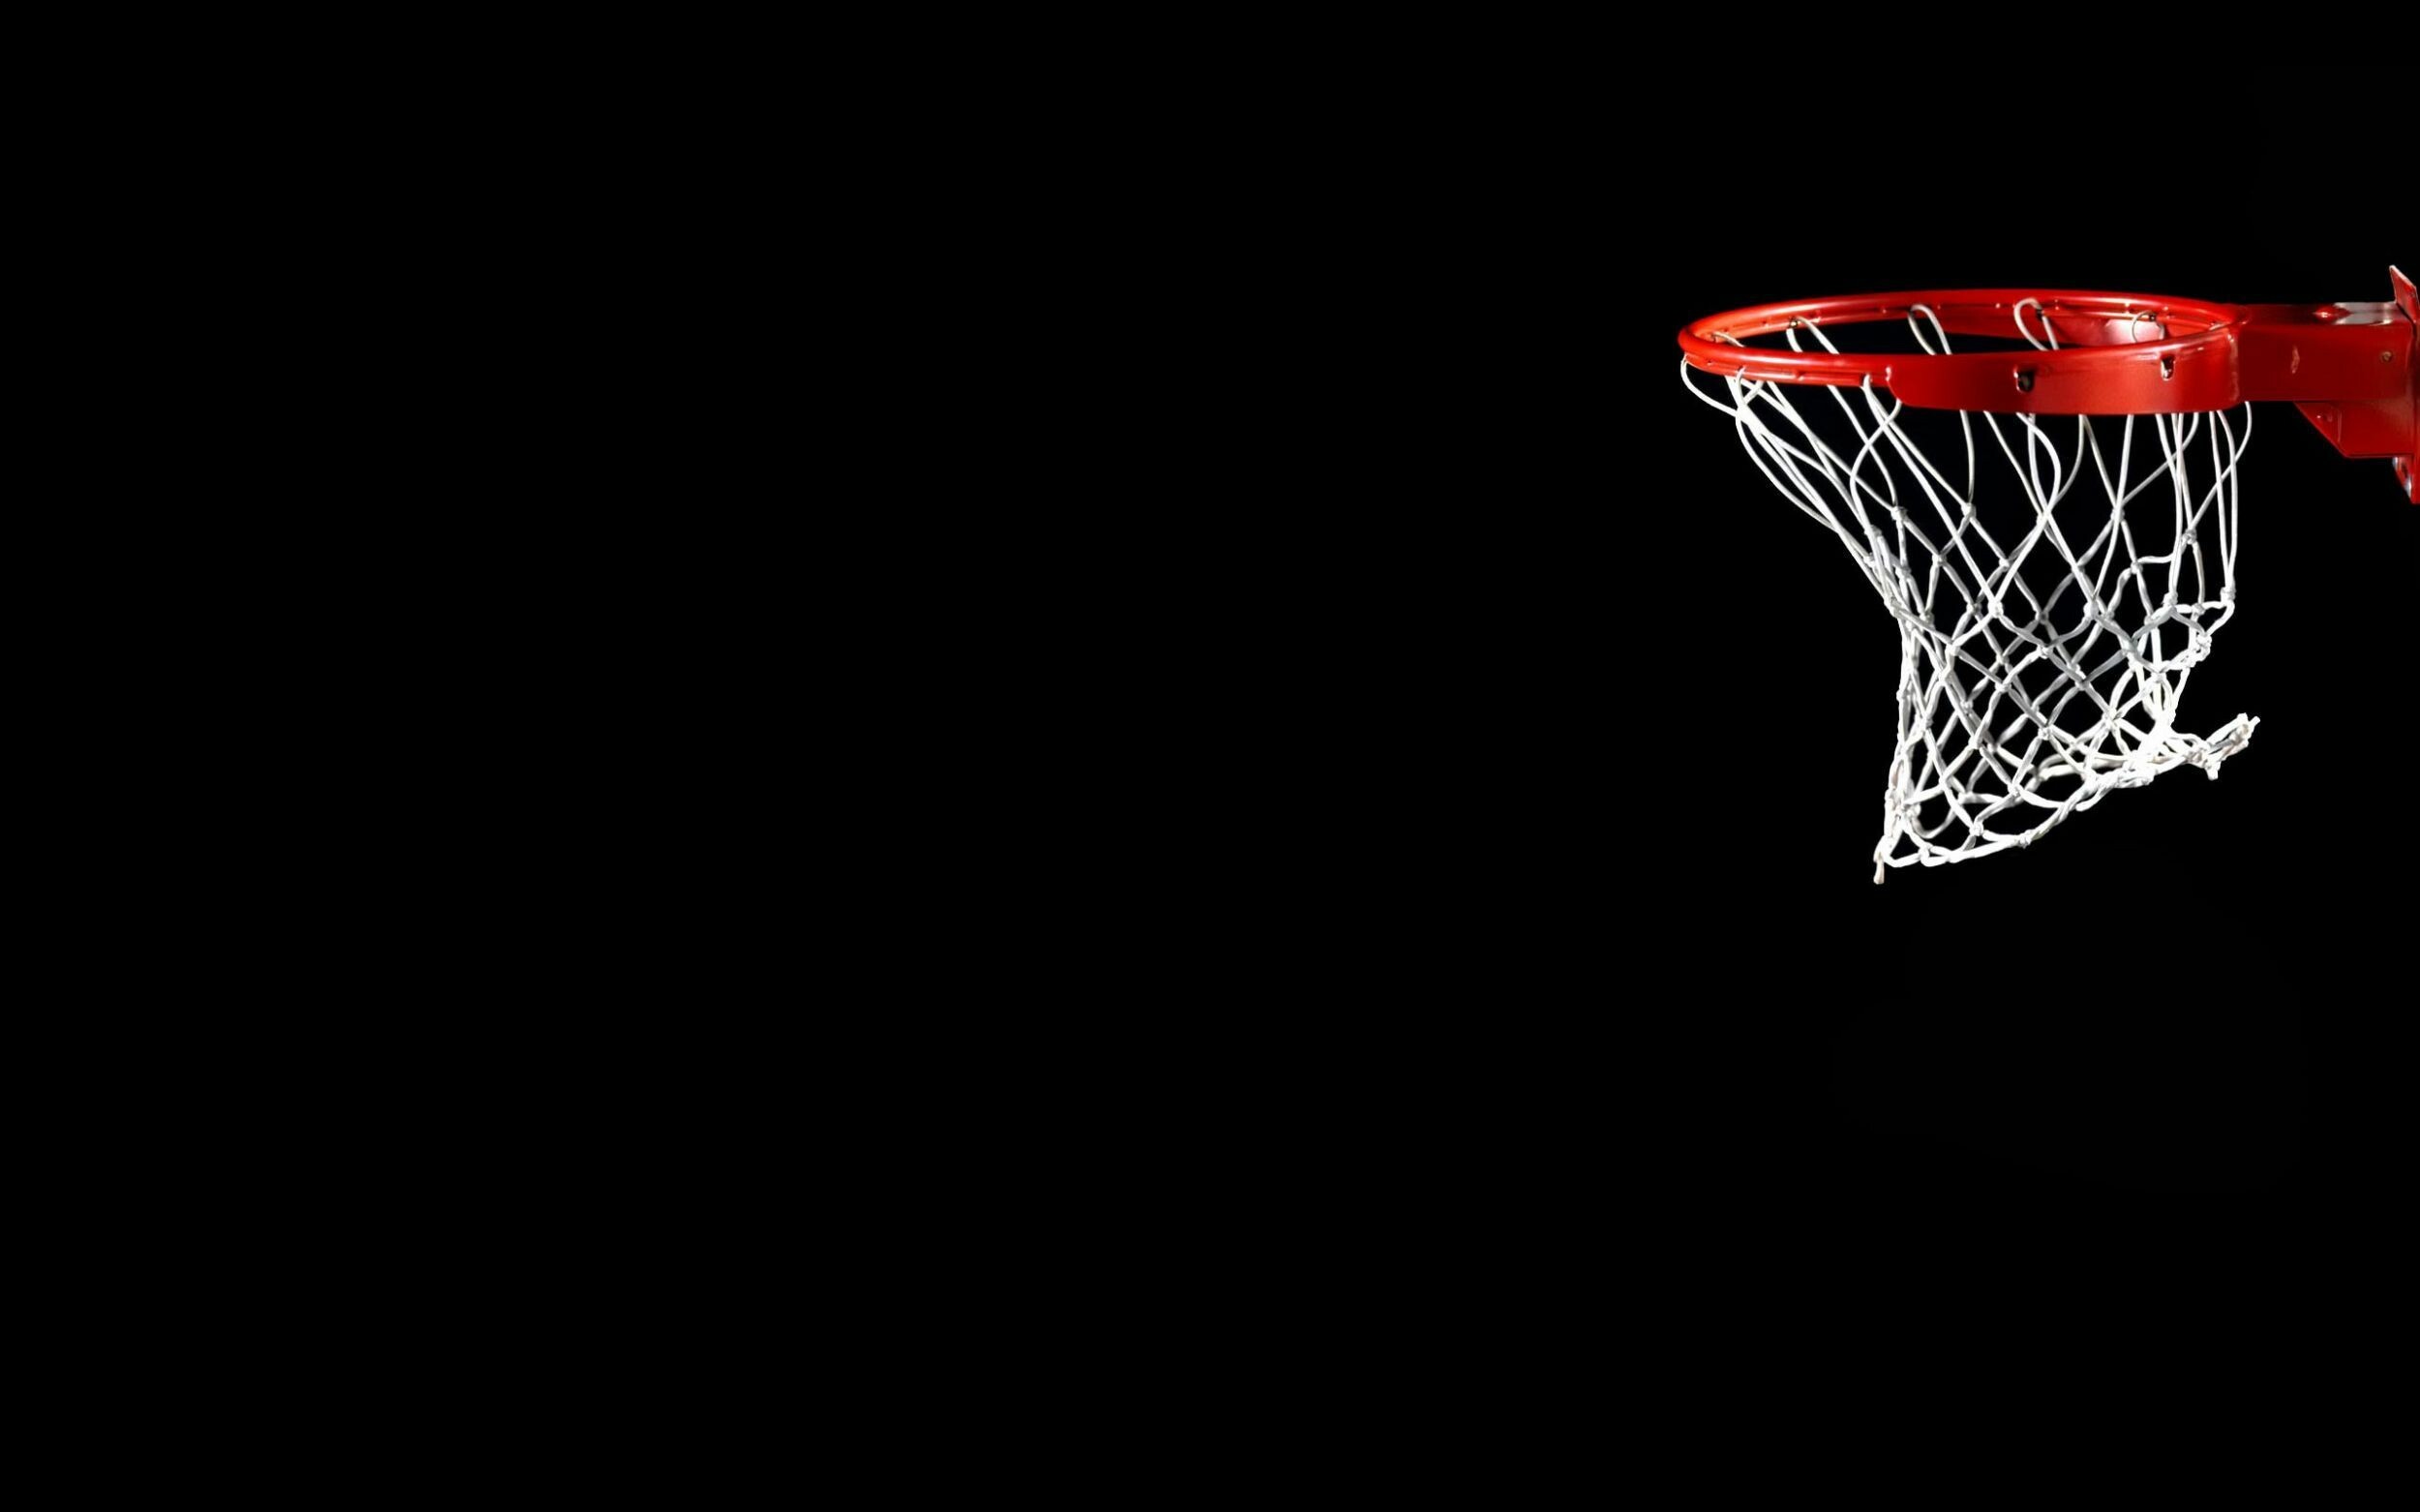 Basketball Laptop Wallpaper: HD, 4K, 5K for PC and Mobile. Download free image for iPhone, Android